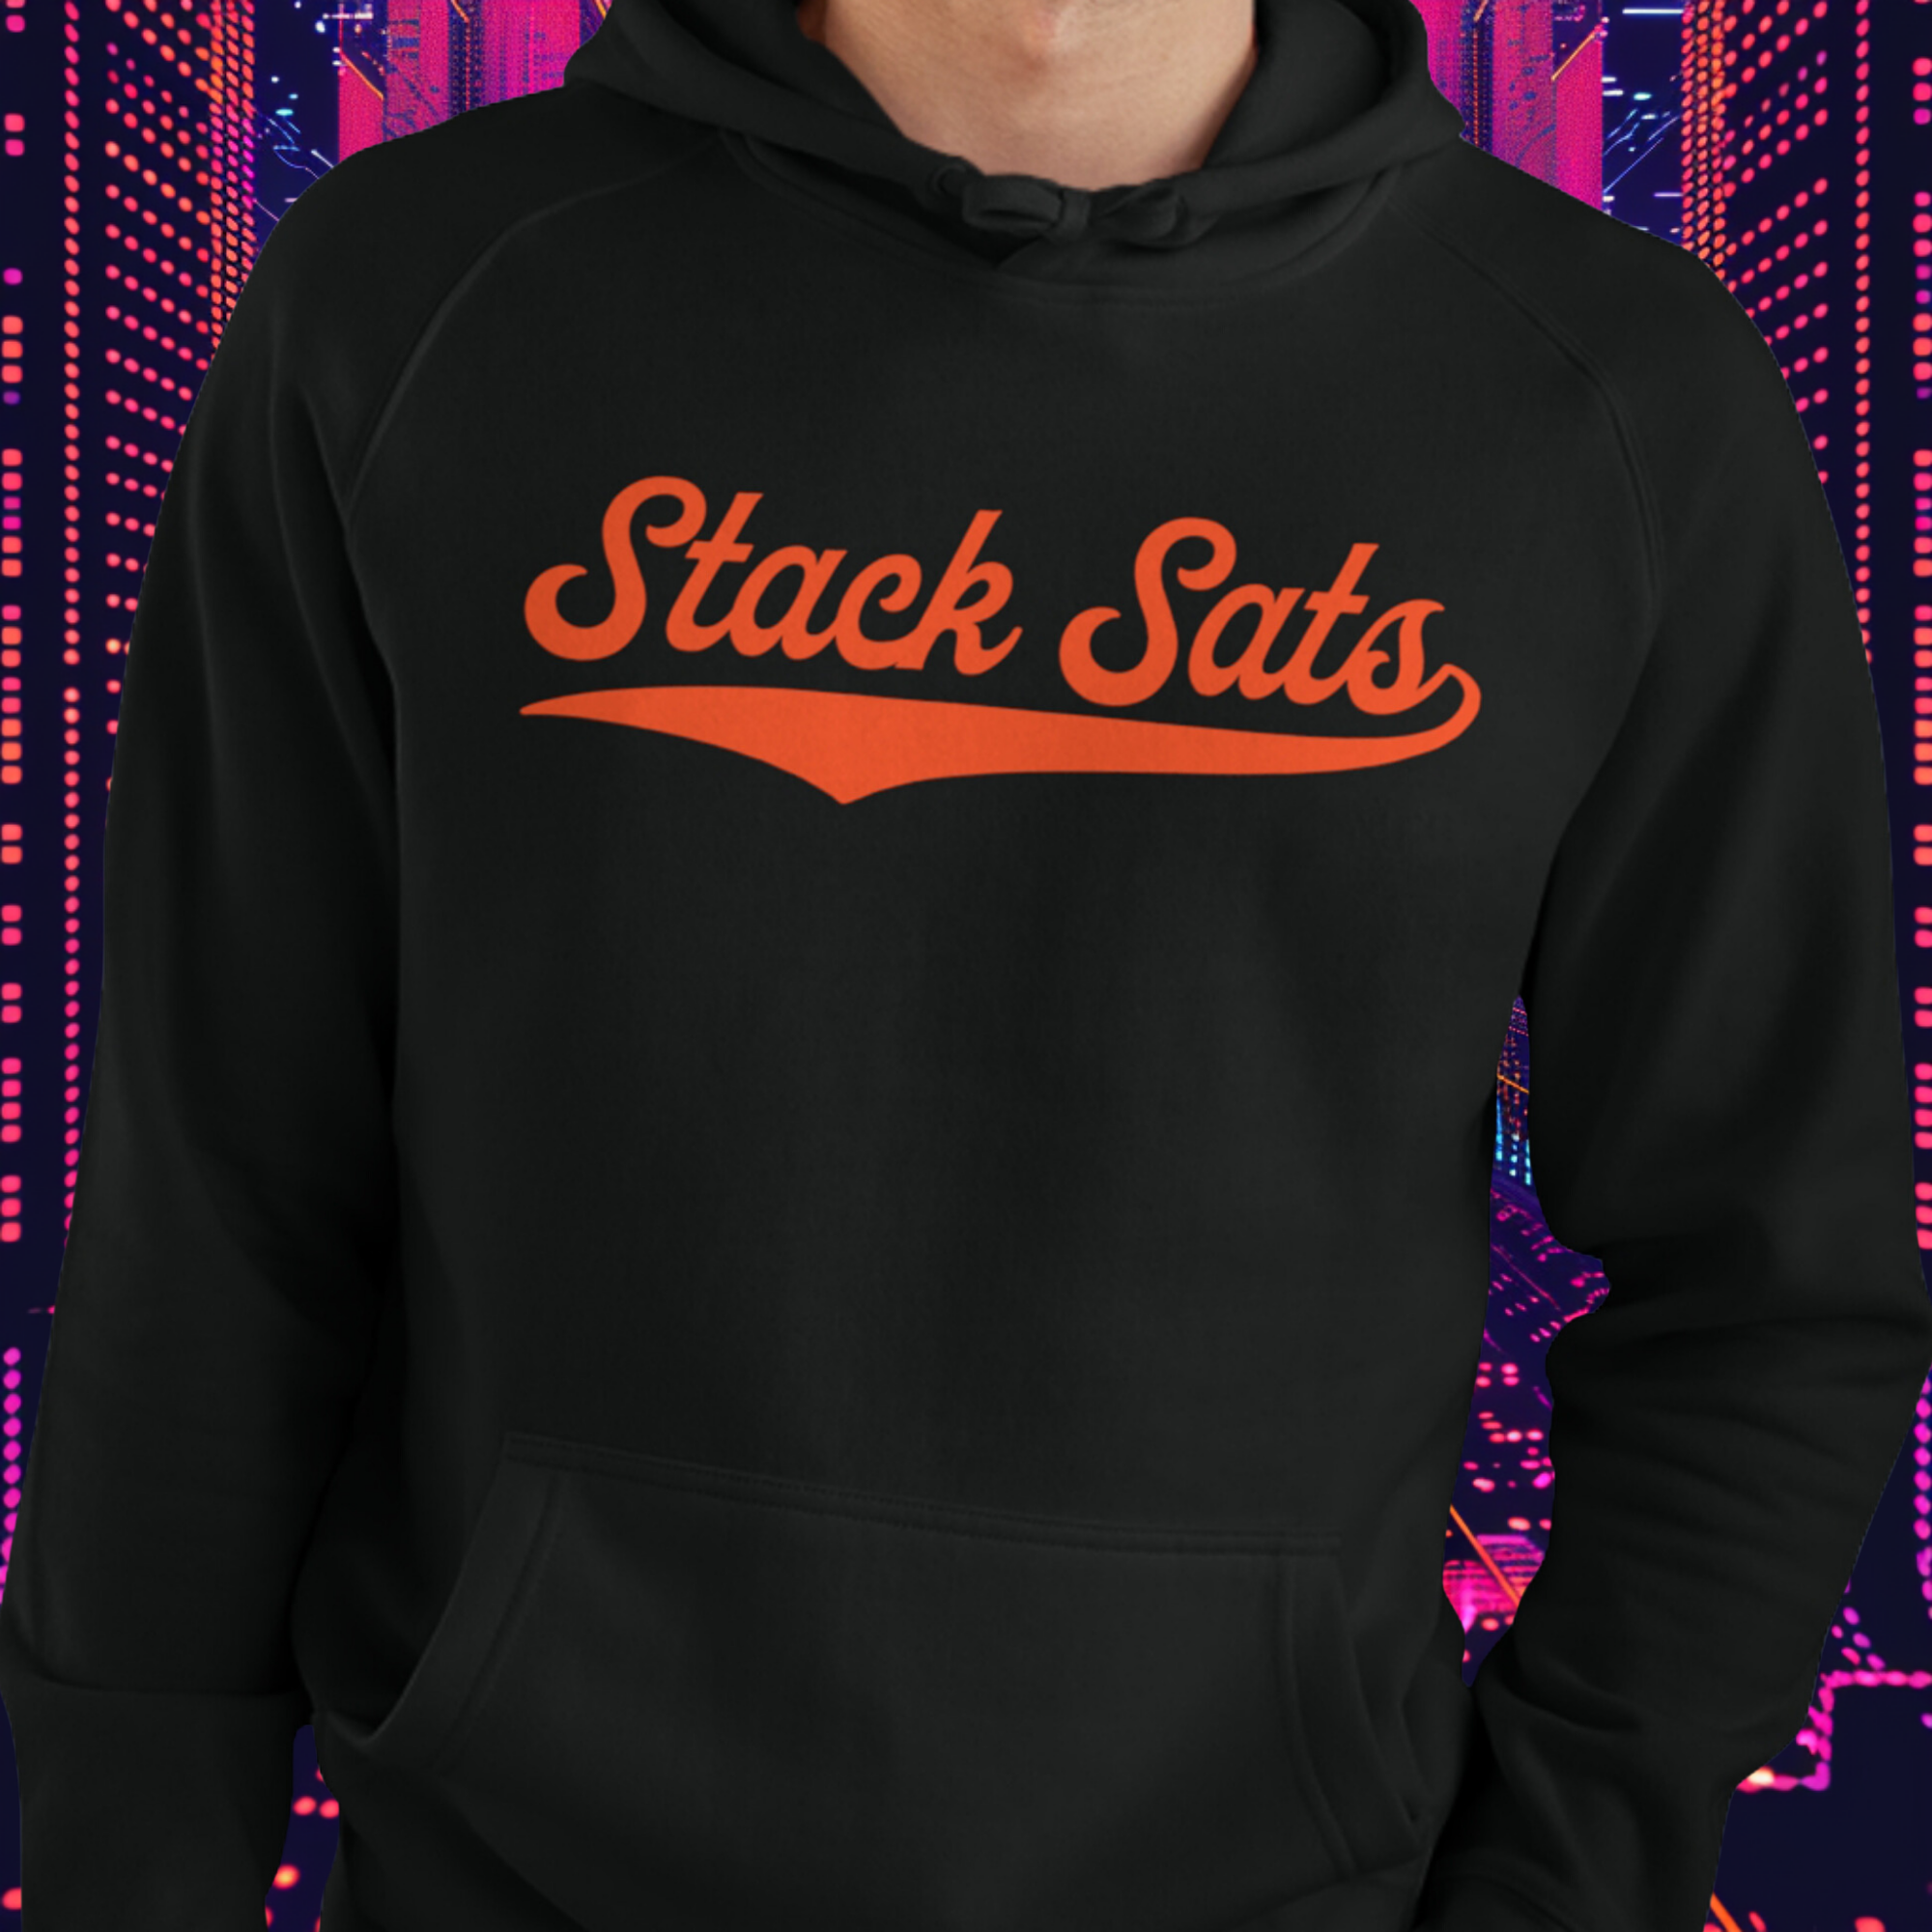  Stack Sats Hoodie (Orange Logo). Male model. Front view. Available at NEONCRYPTO STORE. 